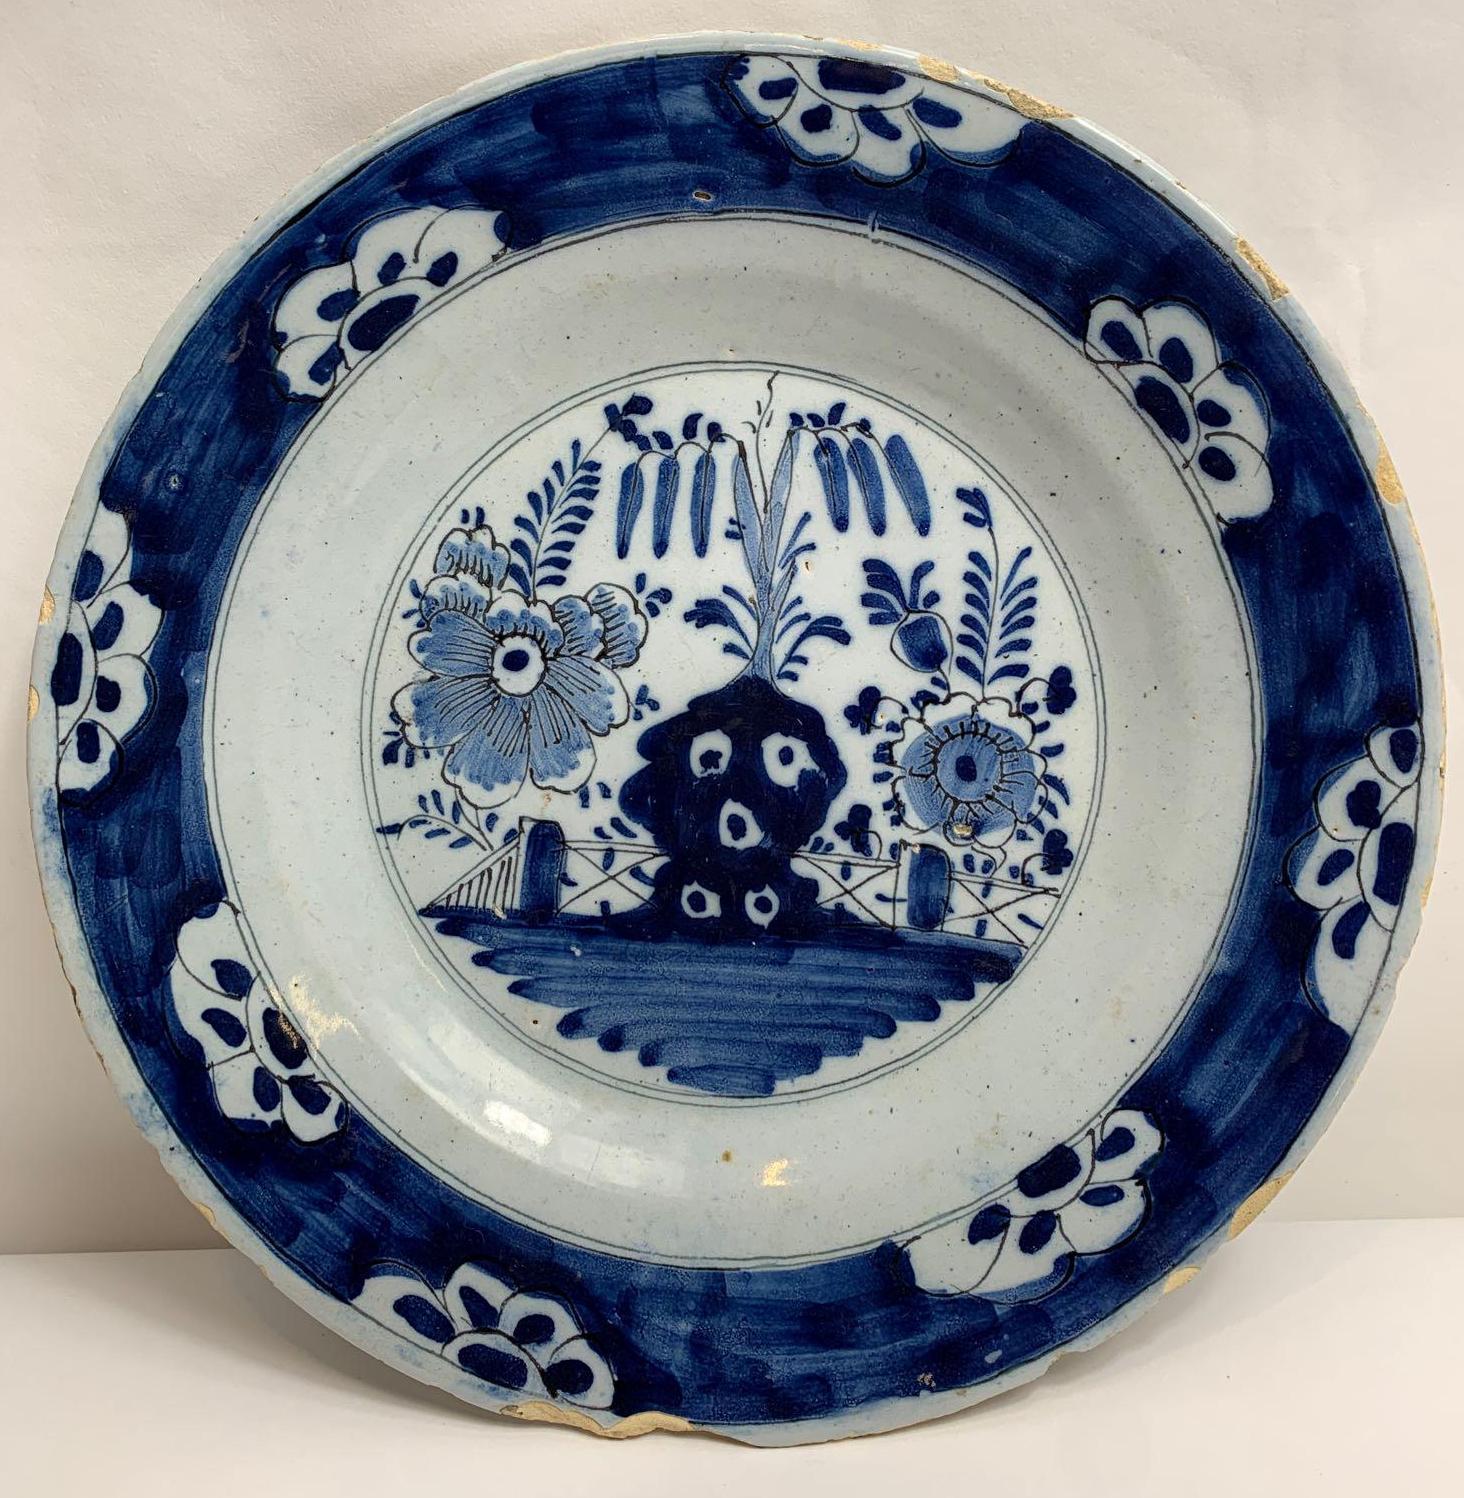 A blue and white Delft plate, decorated with plants and flowers, 23.5cm diameter